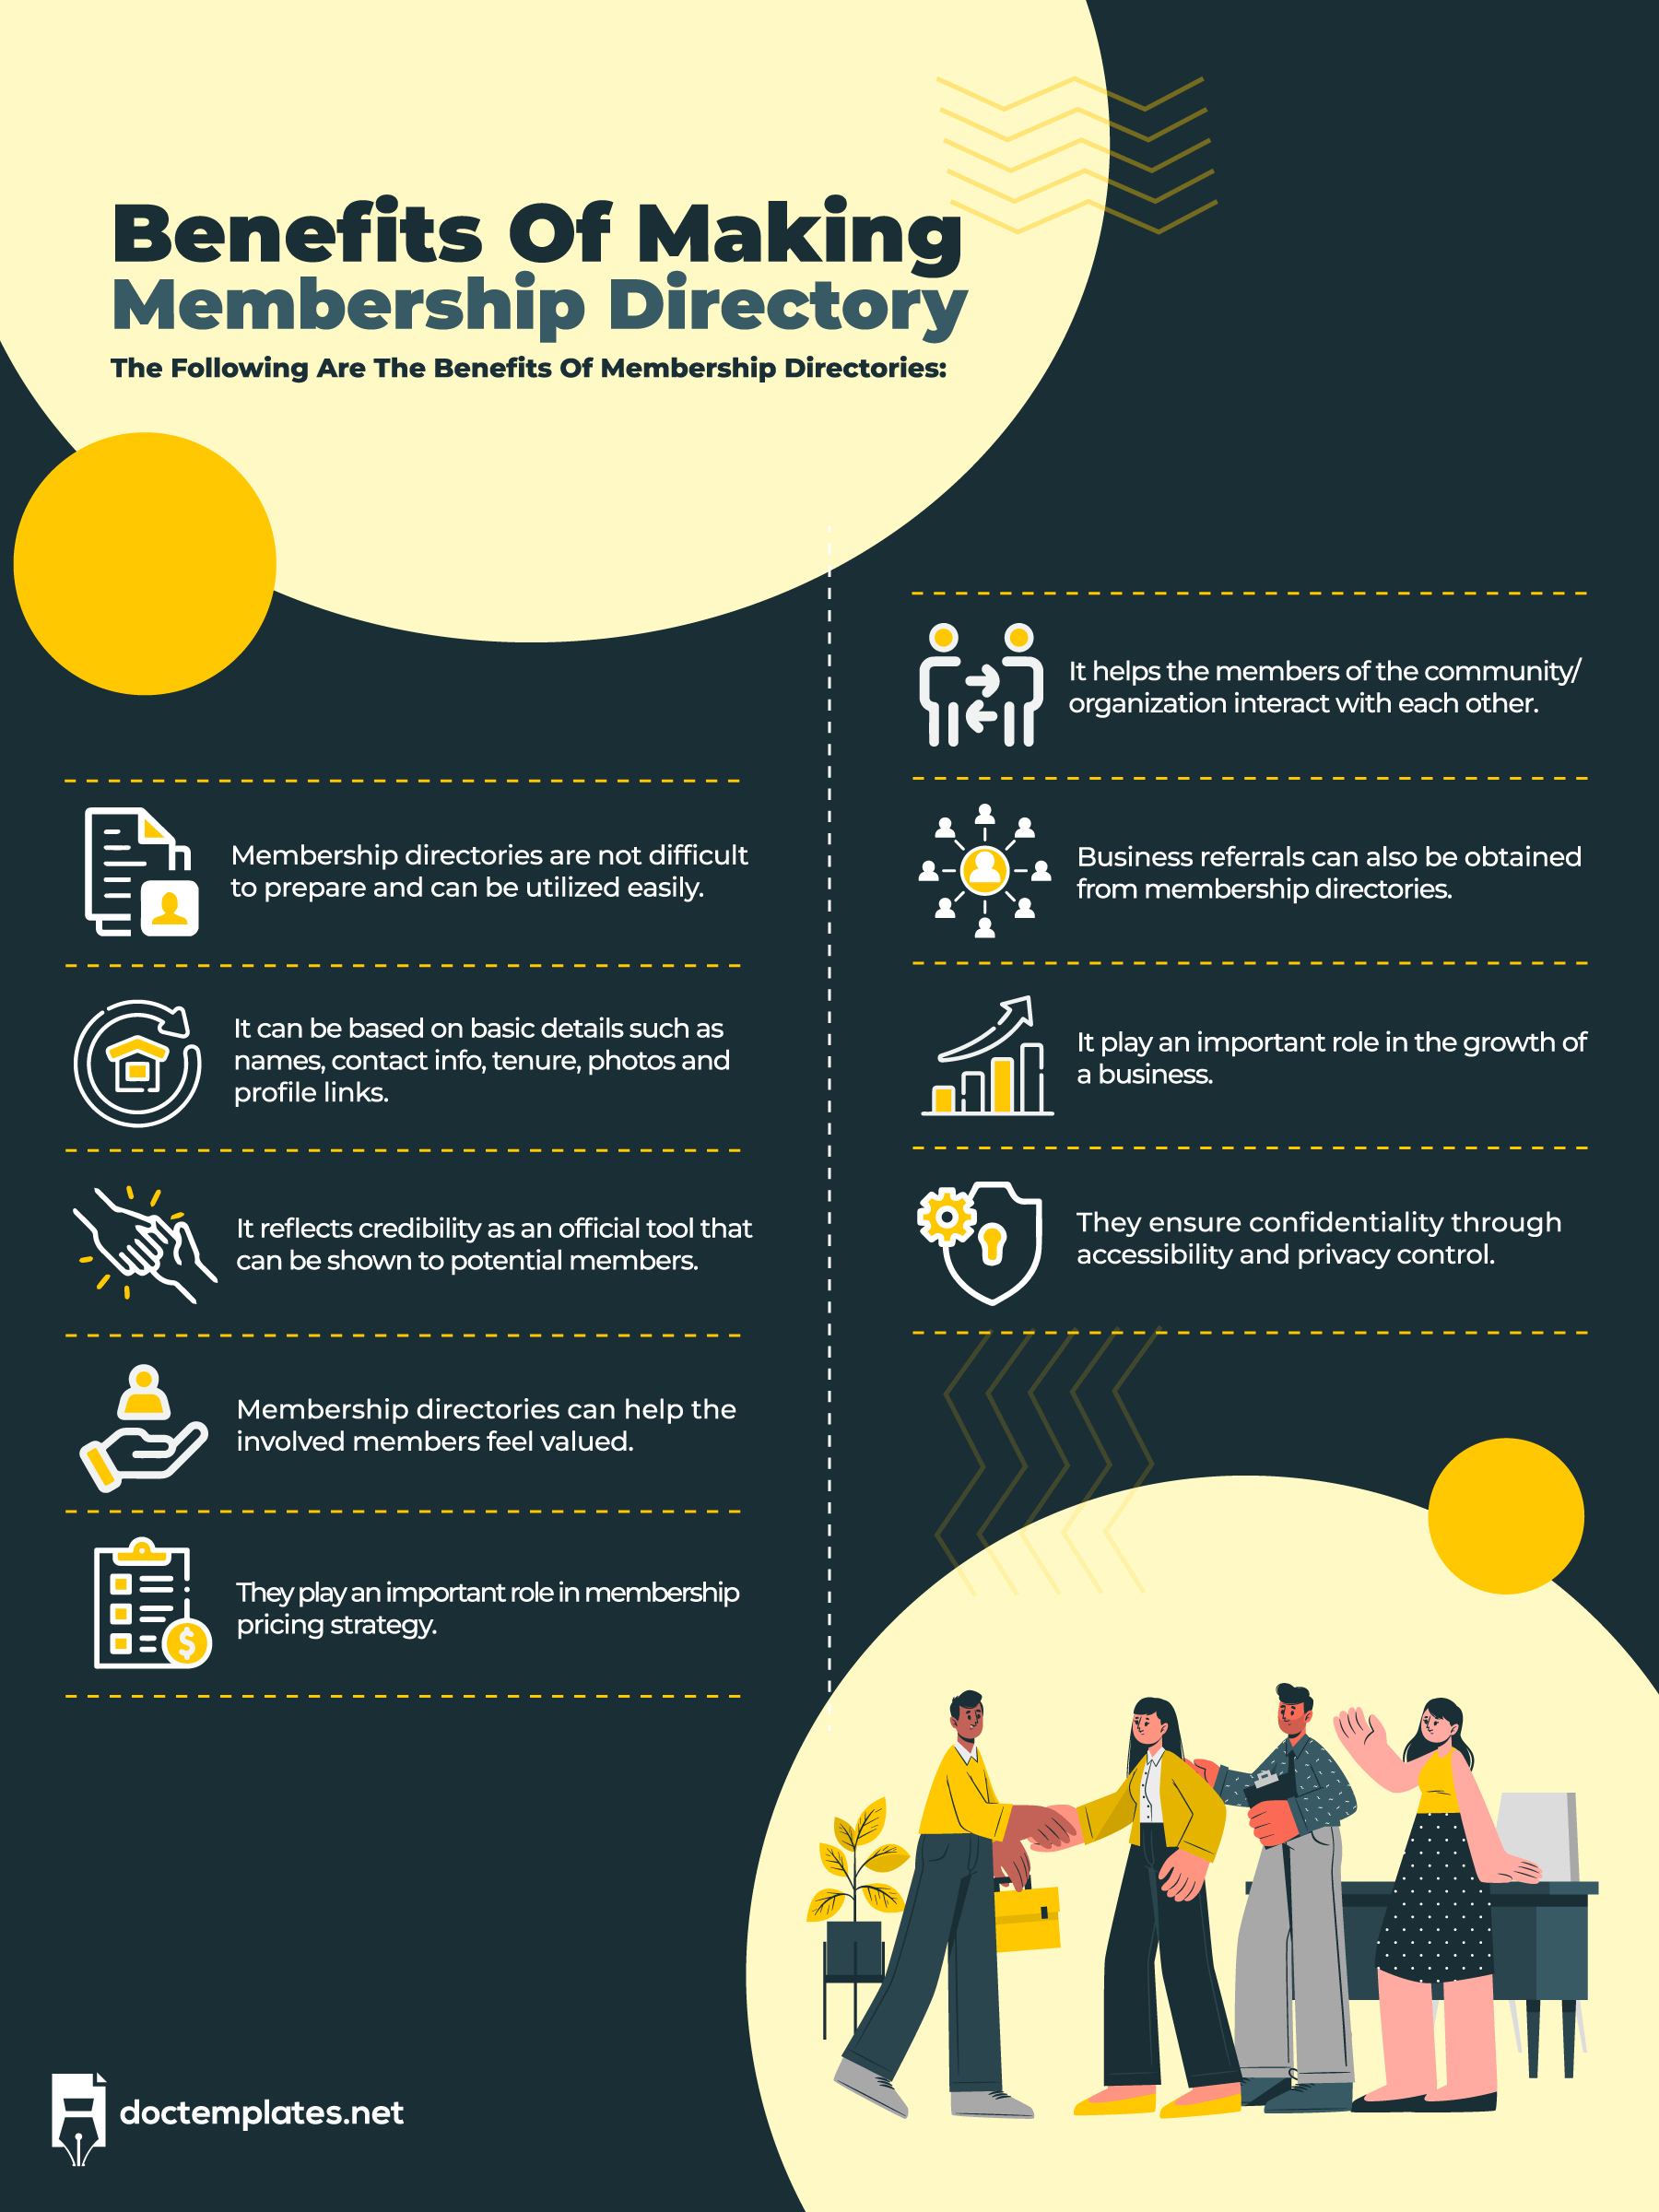 This infographic is about membership directory benefits.